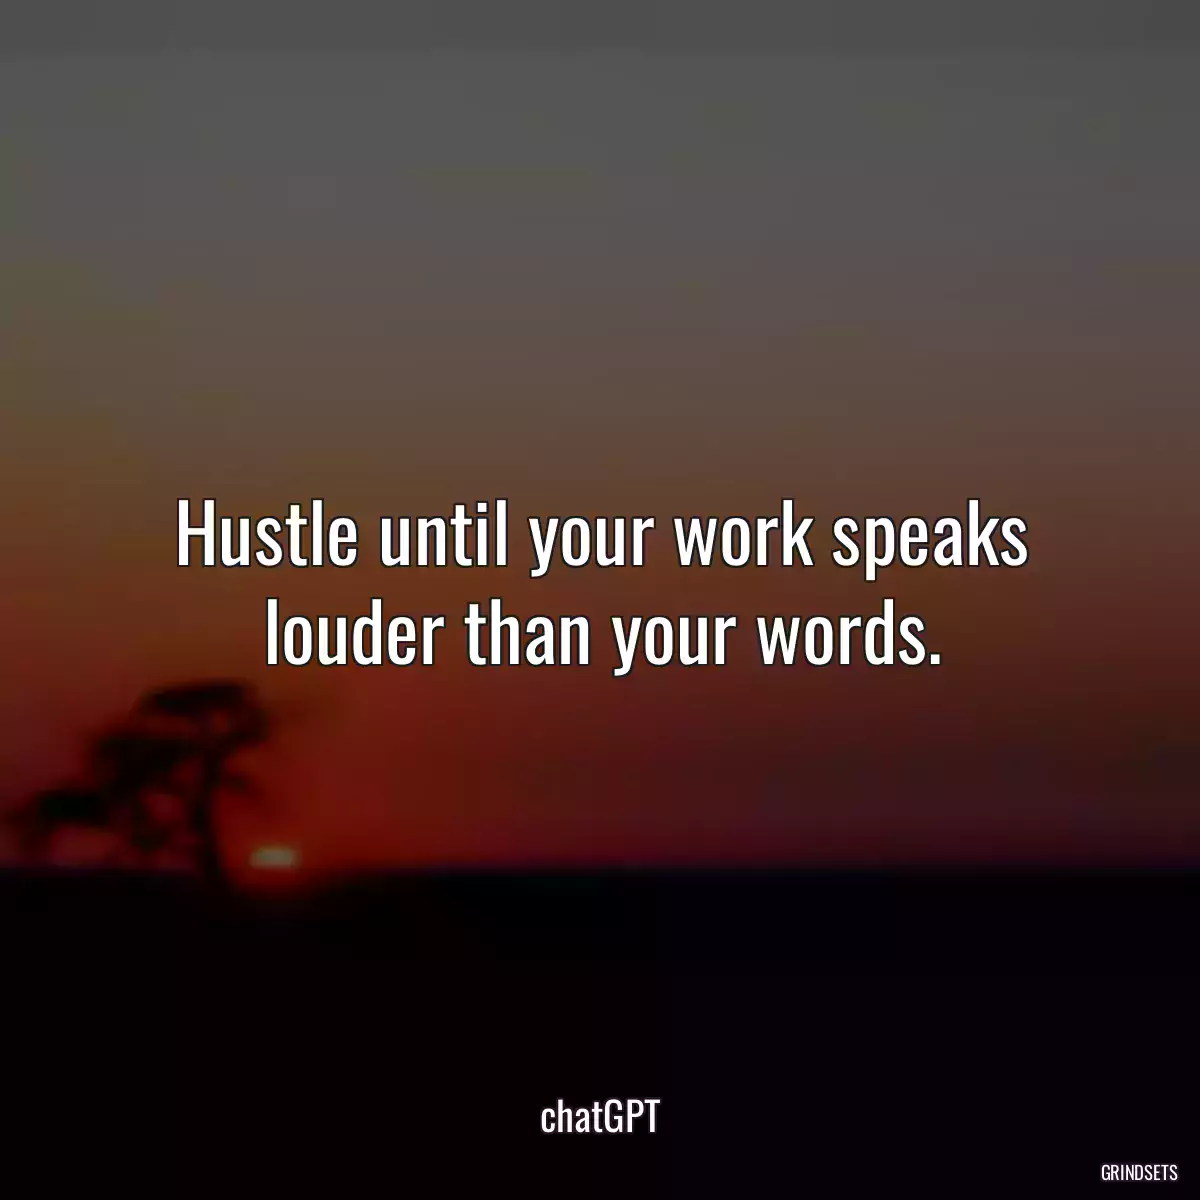 Hustle until your work speaks louder than your words.